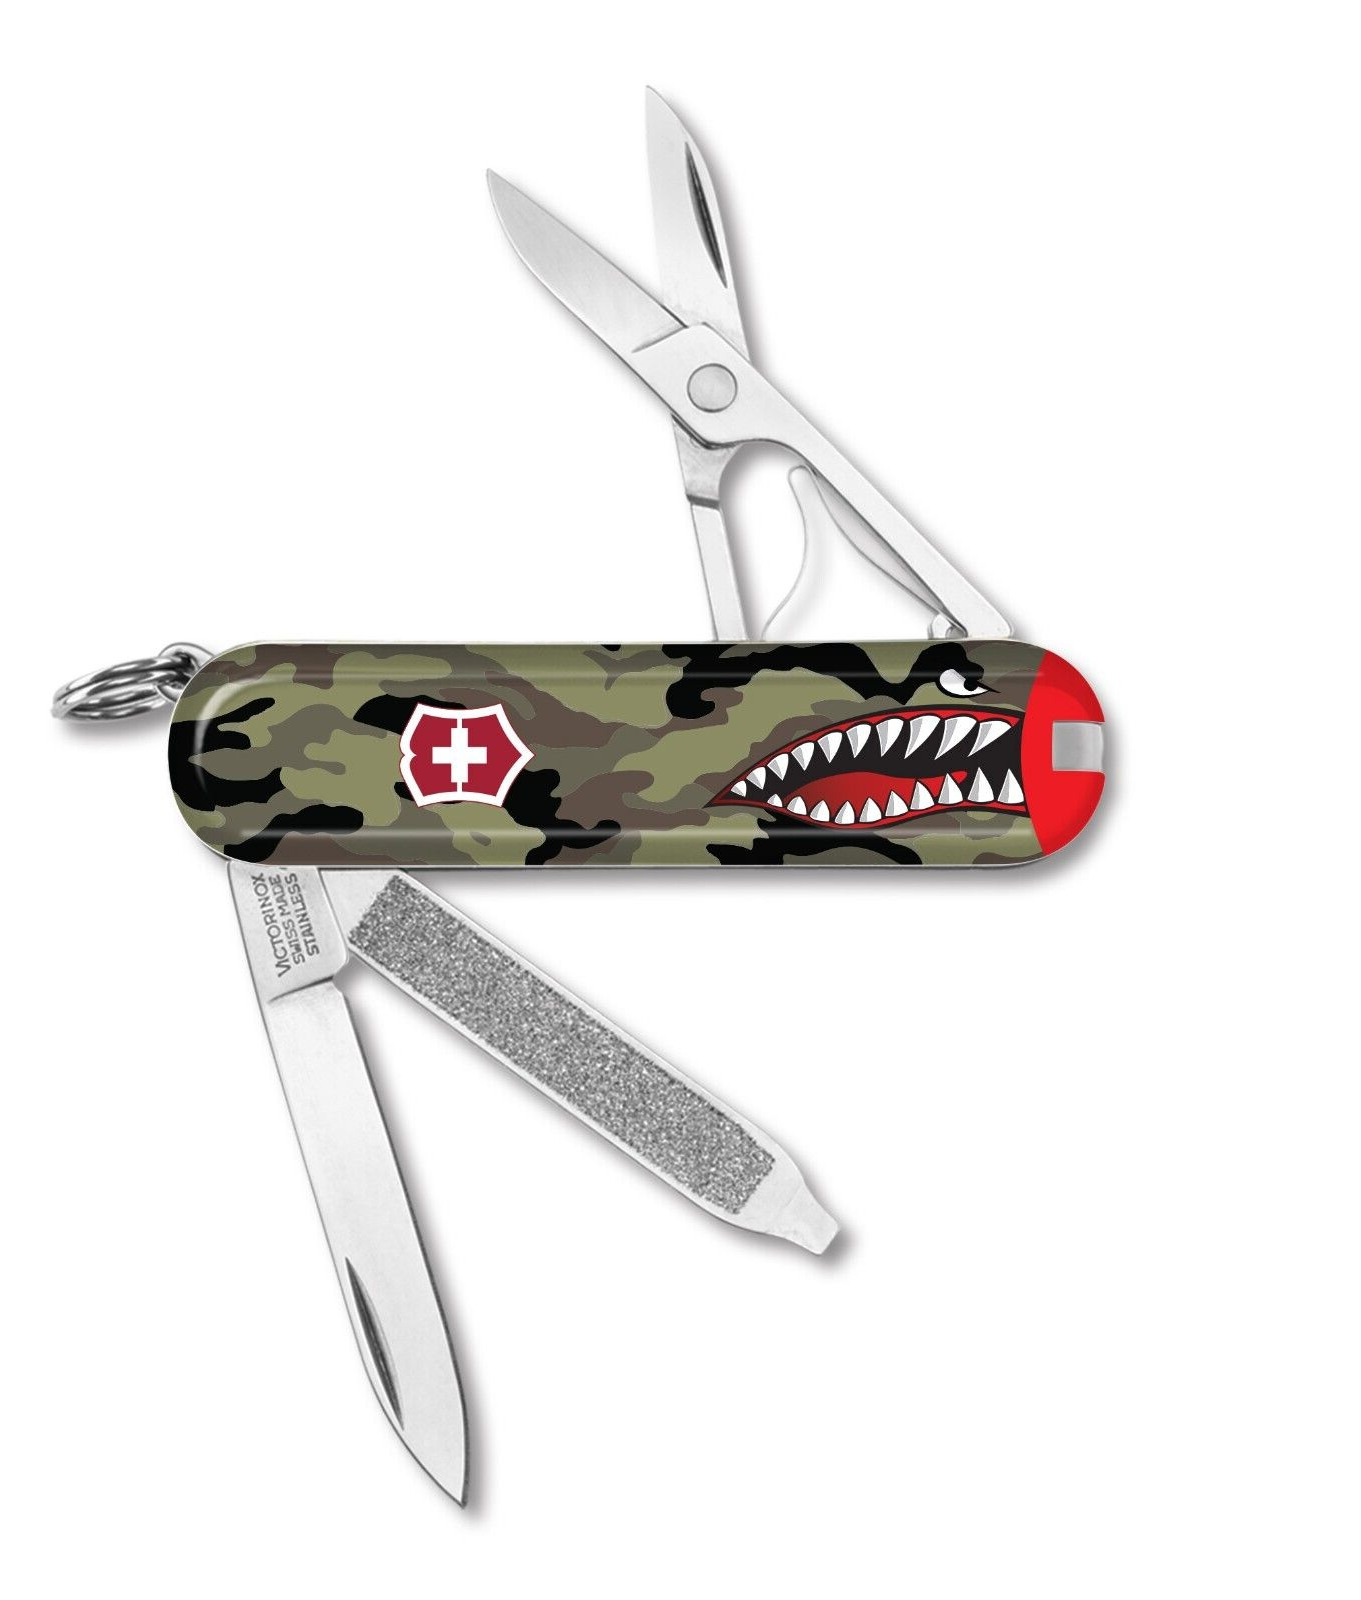 VICTORINOX SWISS ARMY KNIVES CAMO SHARK MOUTH MILITARY NOSE ART CLASSIC SD KNIFE